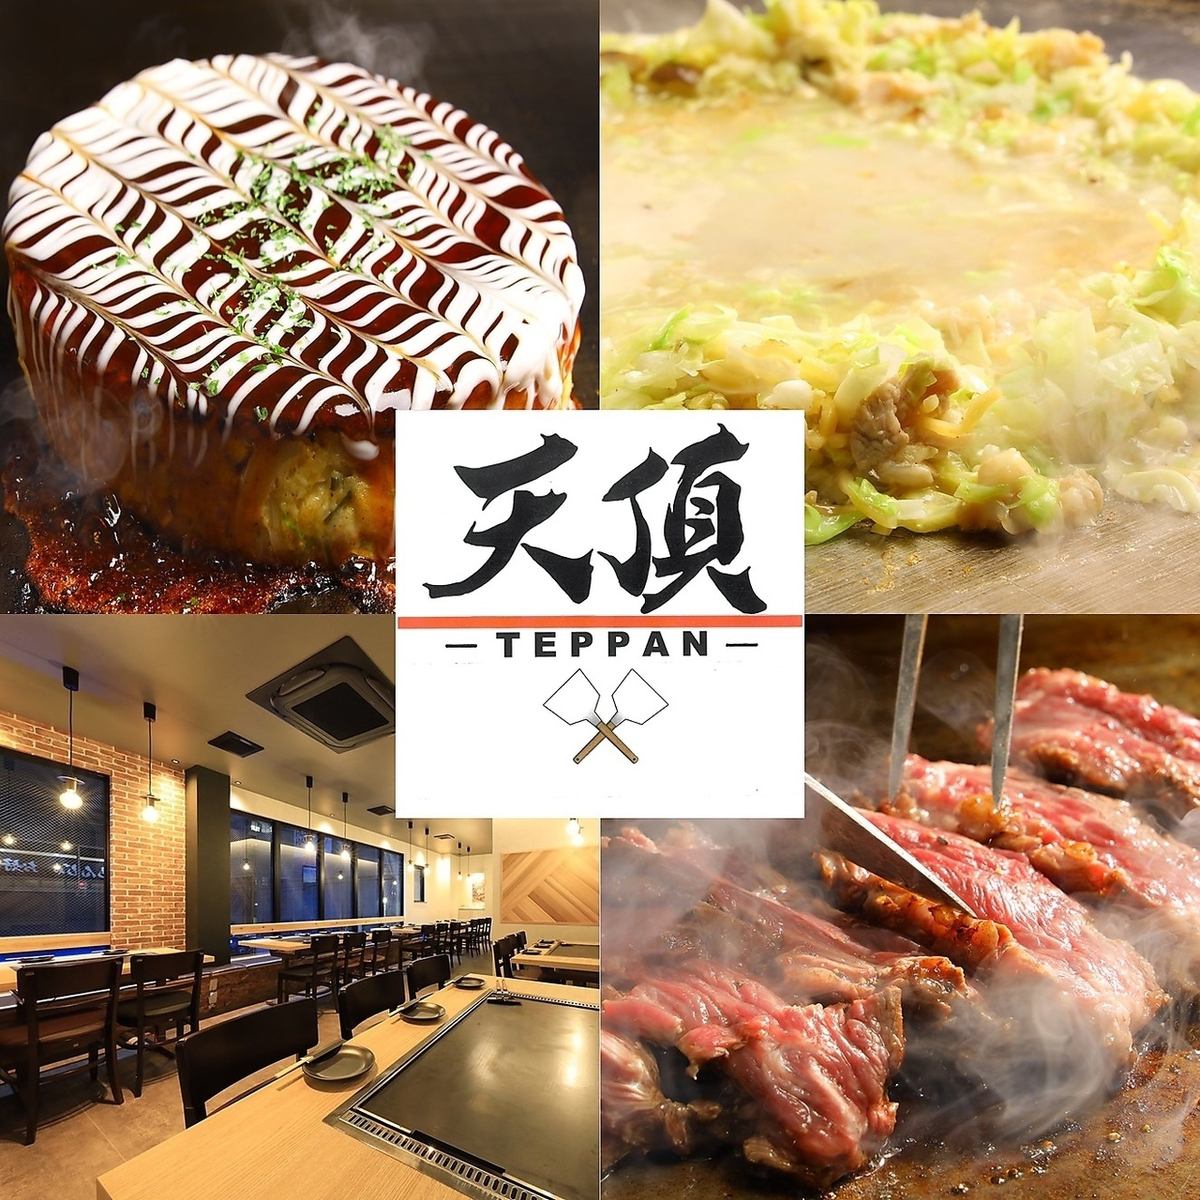 A 5-minute walk from Nagoya Station! Completely private rooms ◎ A stylish teppanyaki restaurant is newly open!